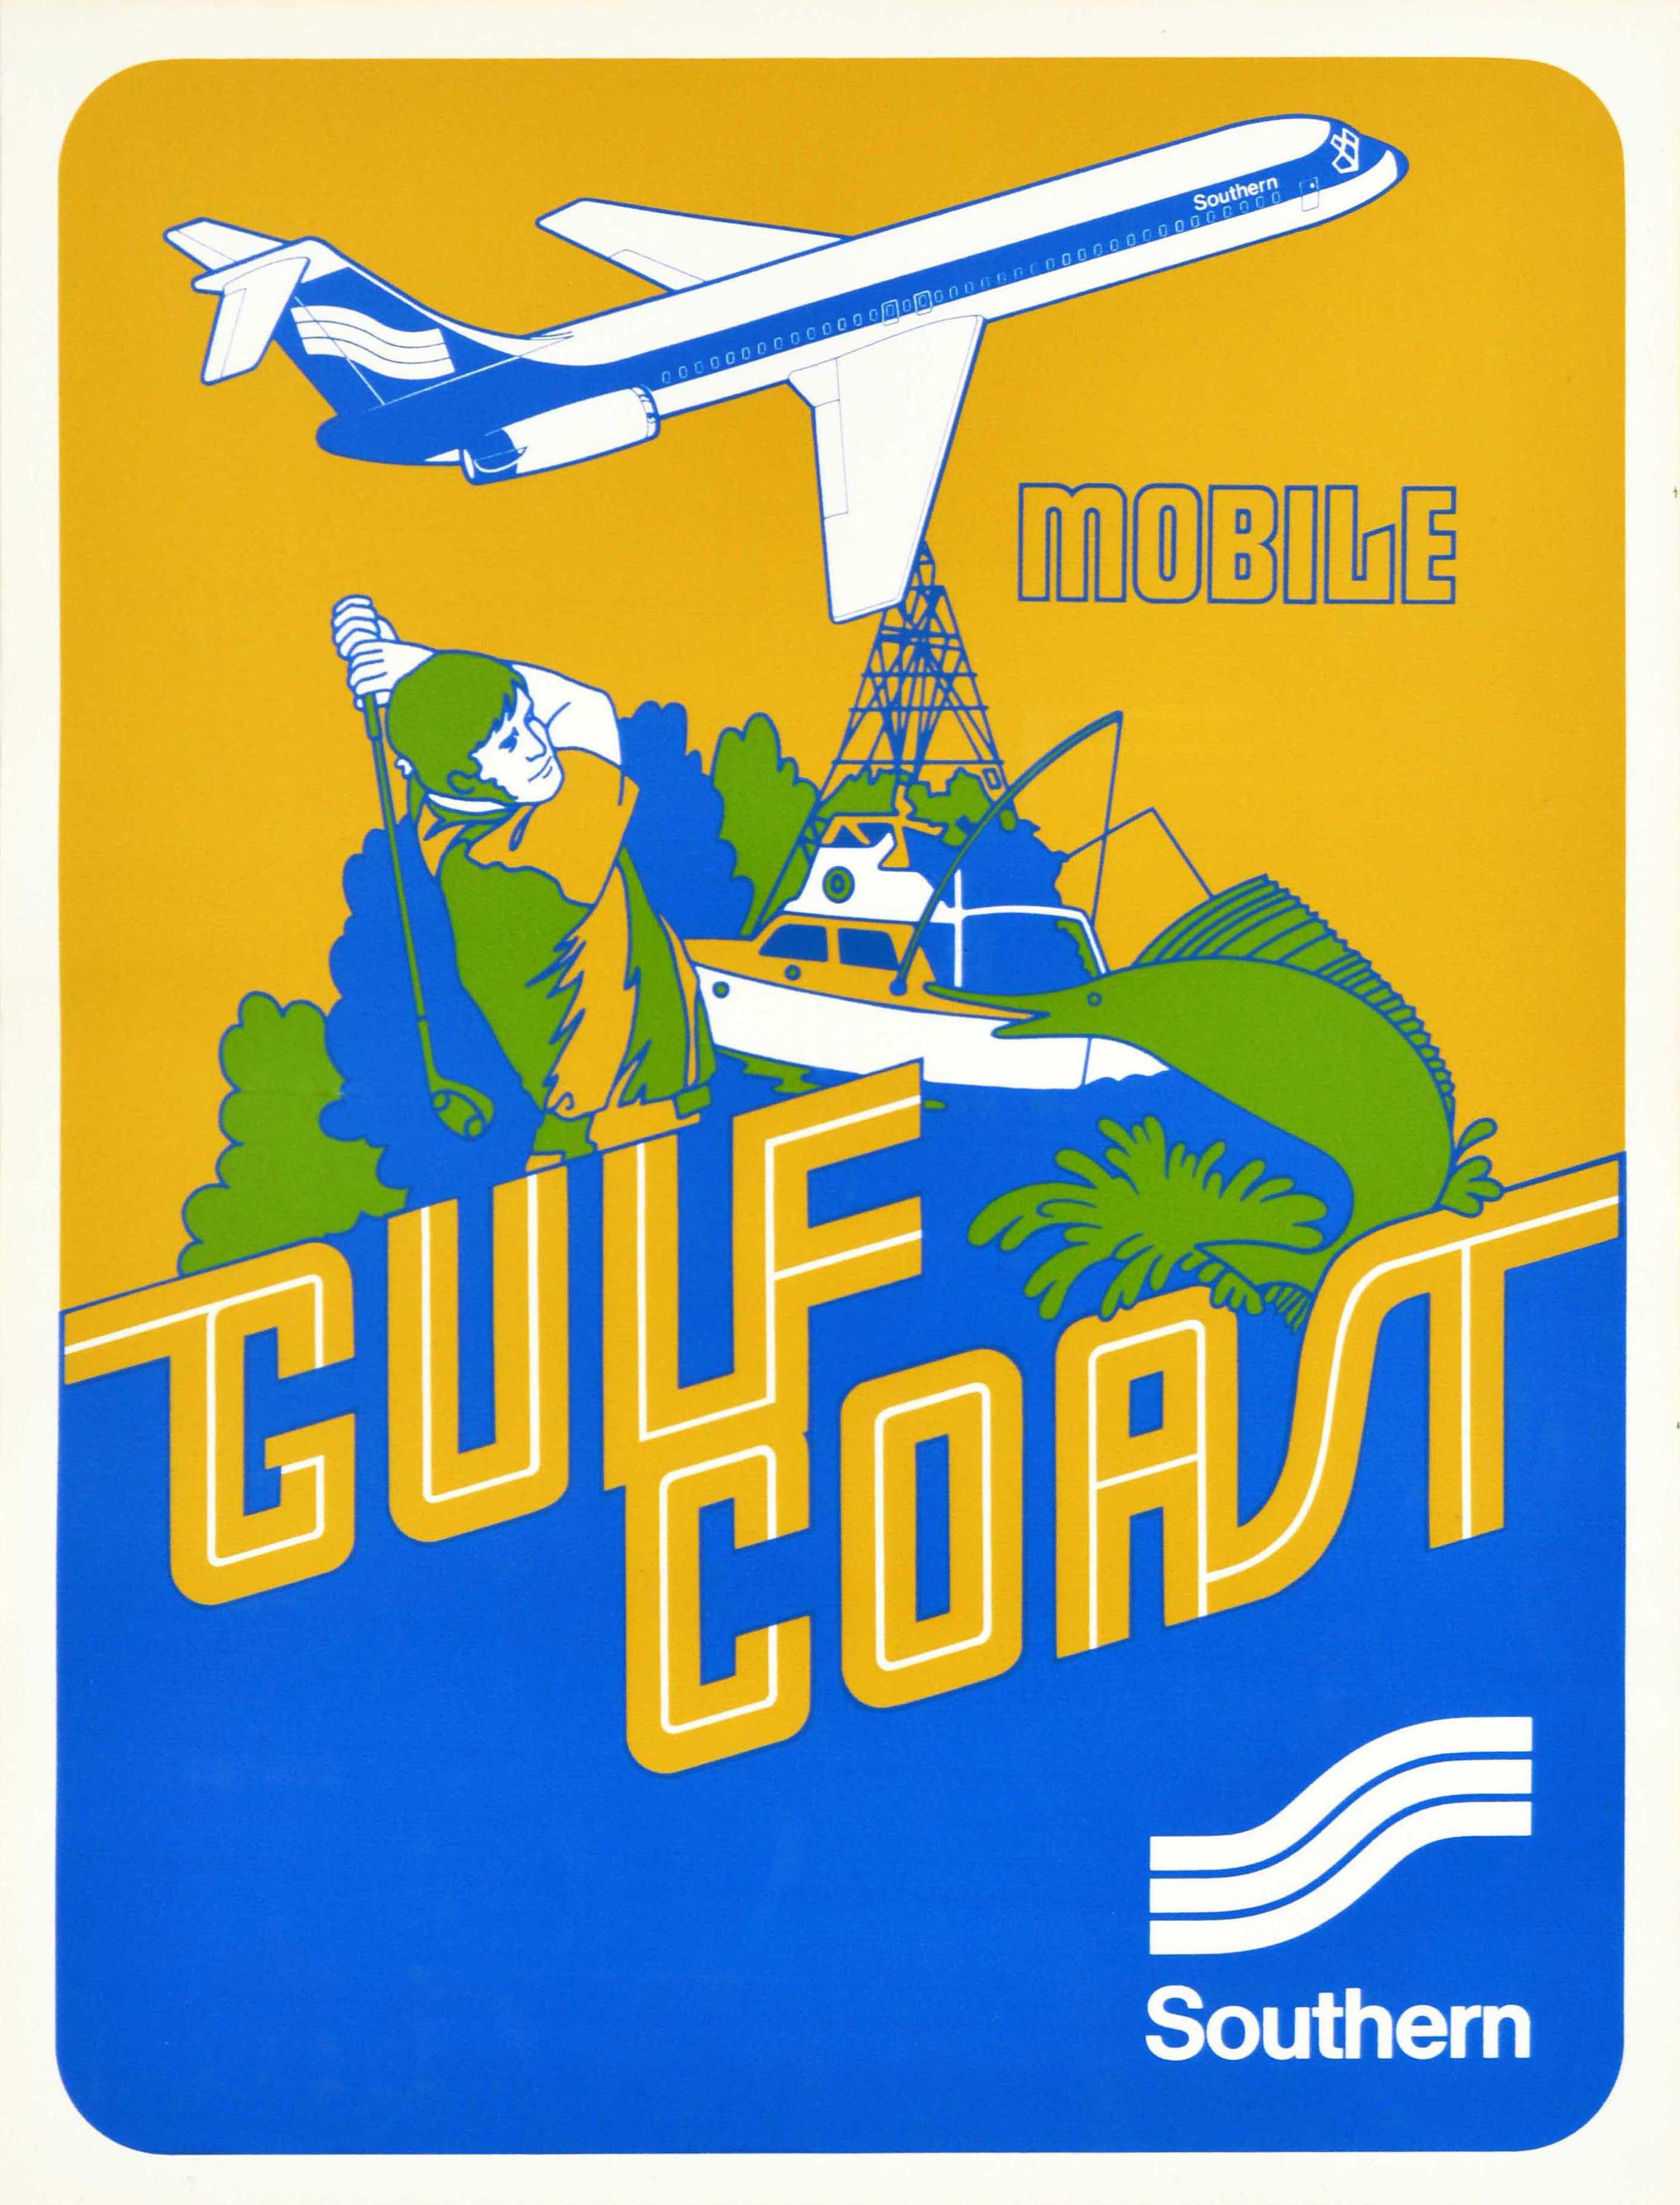 Unknown Print - Original Vintage Airline Poster Southern Gulf Coast Mobile Alabama Golf Fishing